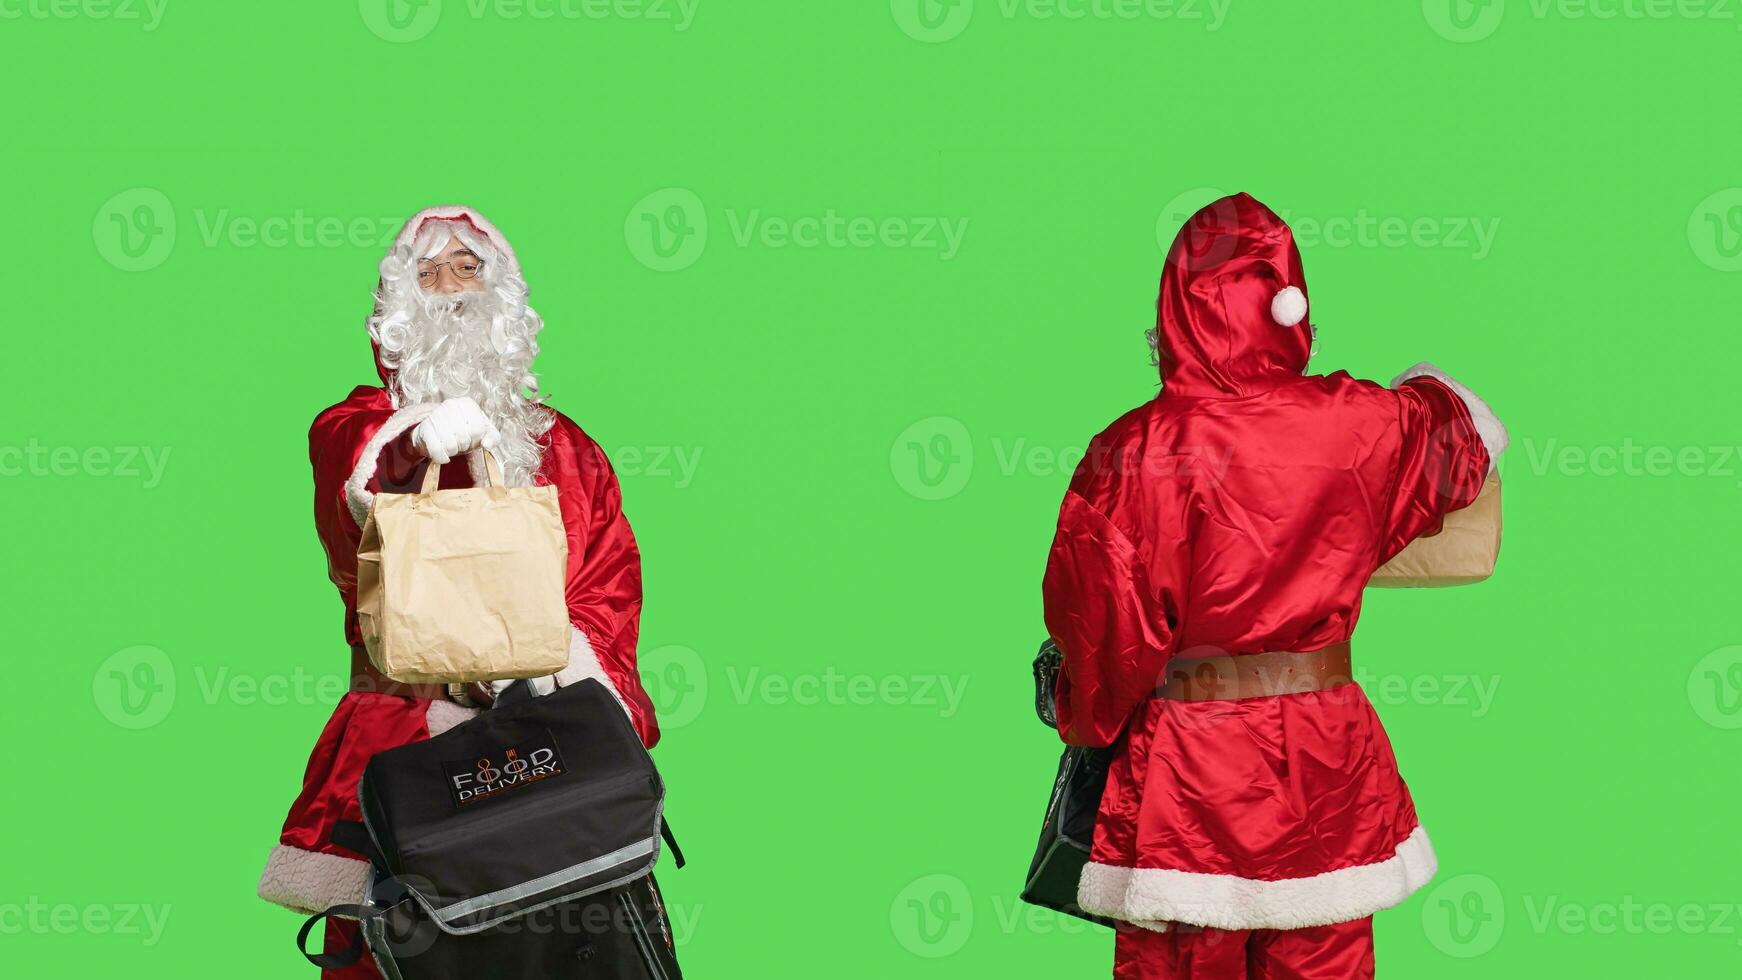 Joyful santa claus person deliver food in paper bag, carrying thermal backpack while he is wearing traditional holiday costume. Man in festive red and white suit, greenscreen backdrop. photo